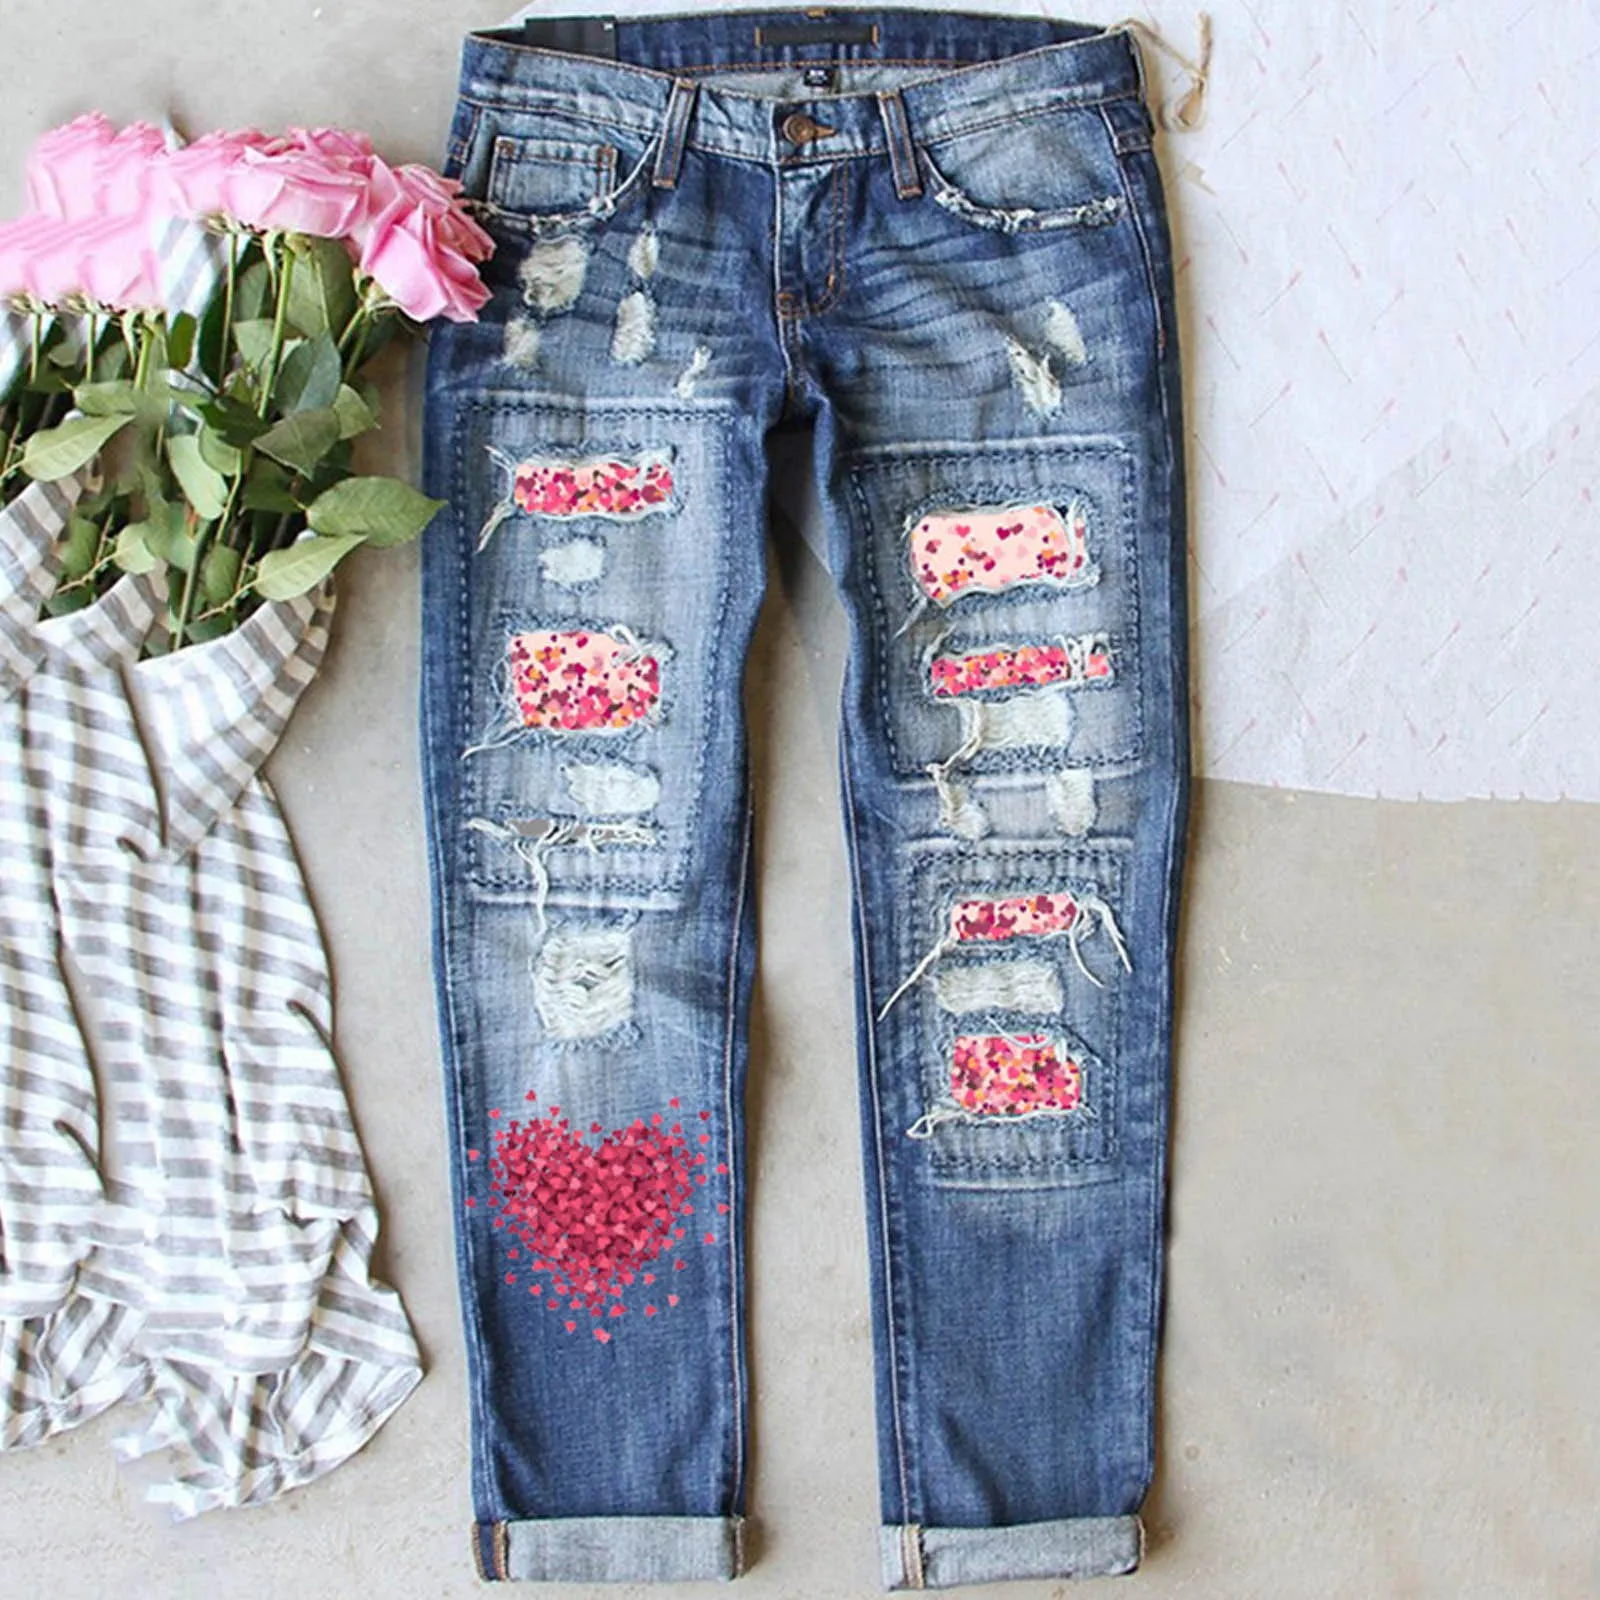 

Valentine's Day Women's Valentine Love Jeans Printed Holes Casual Women's Denim Pants Gift For Lovers Couple Clothes